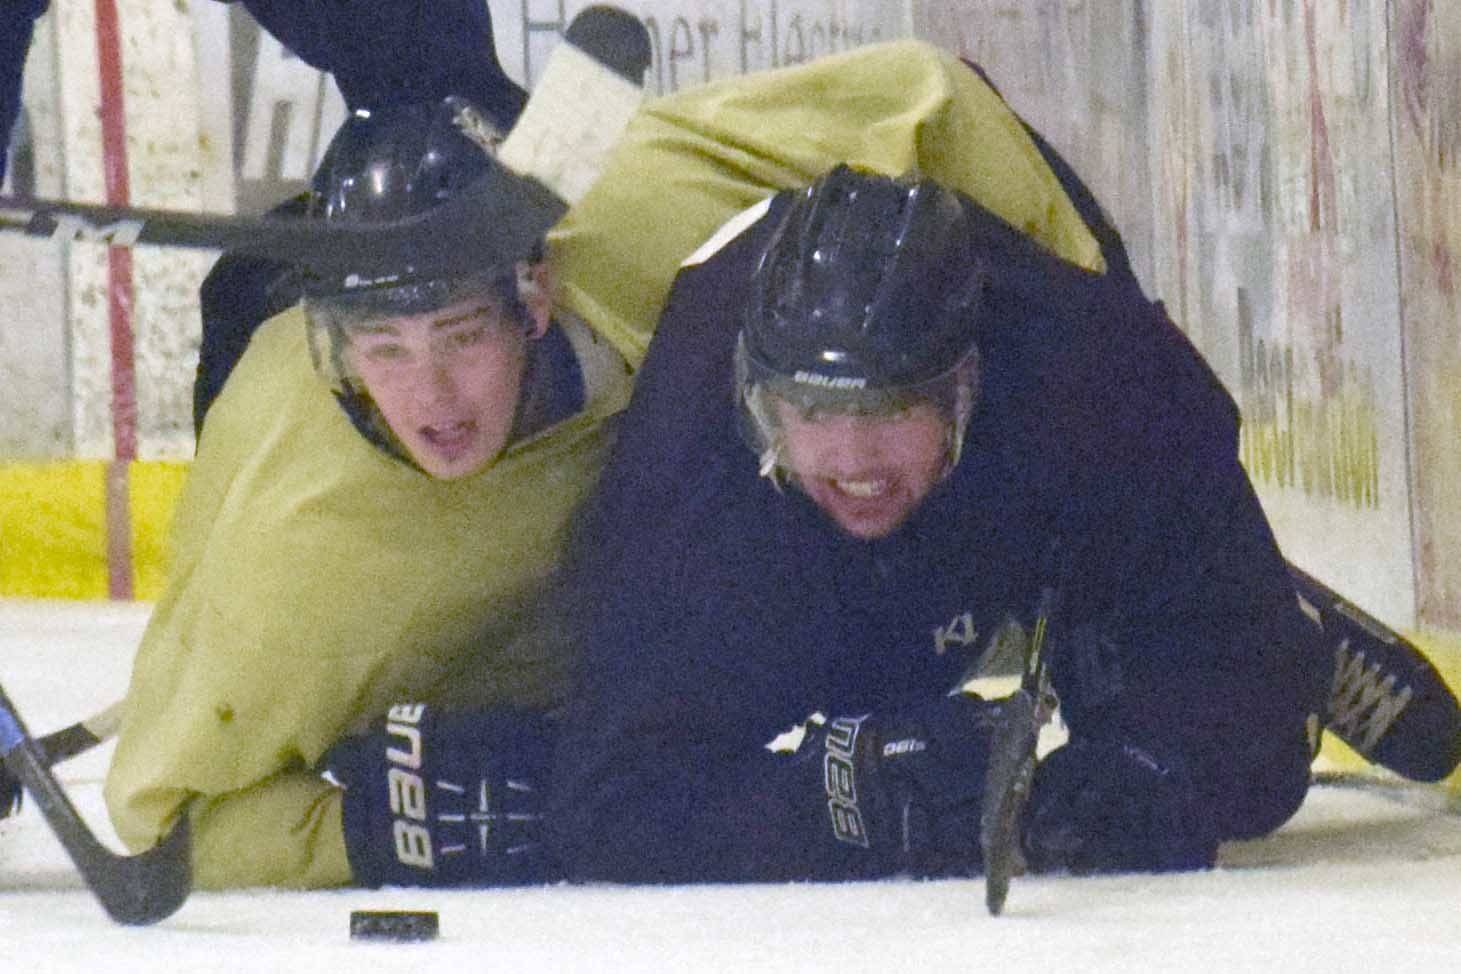 Preston Weeks of the Gold and Emils Ezitis of the Brown battle for the puck Friday, Sept. 7, 2018, in the Brown-Gold Game at the Kenai Multi-Purpose Facility. (Photo by Jeff Helminiak/Peninsula Clarion)